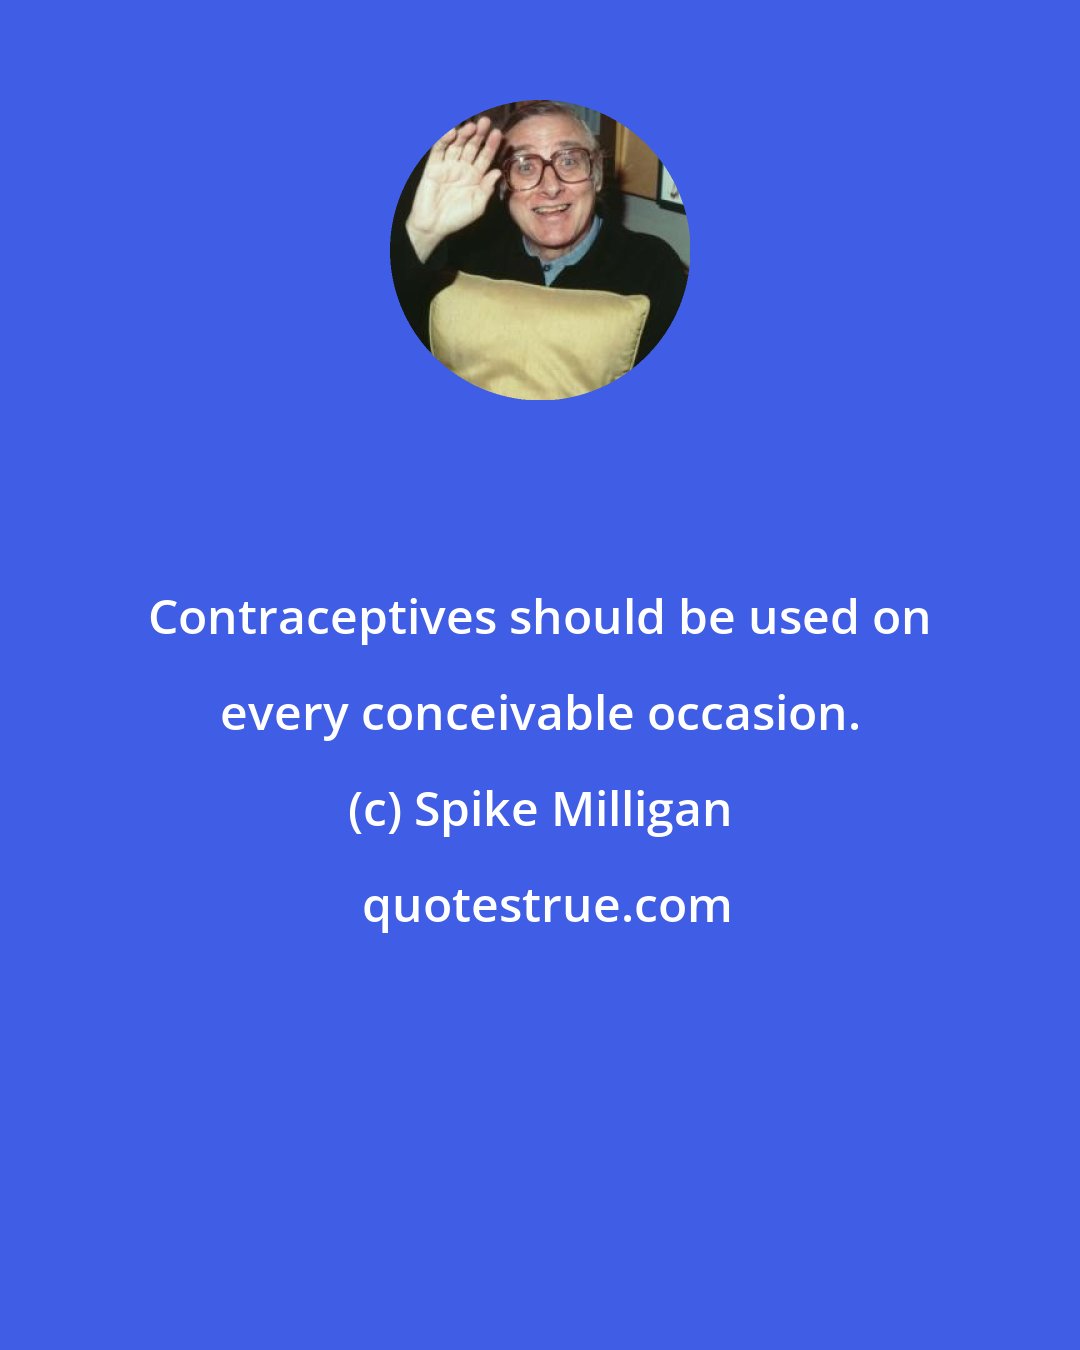 Spike Milligan: Contraceptives should be used on every conceivable occasion.